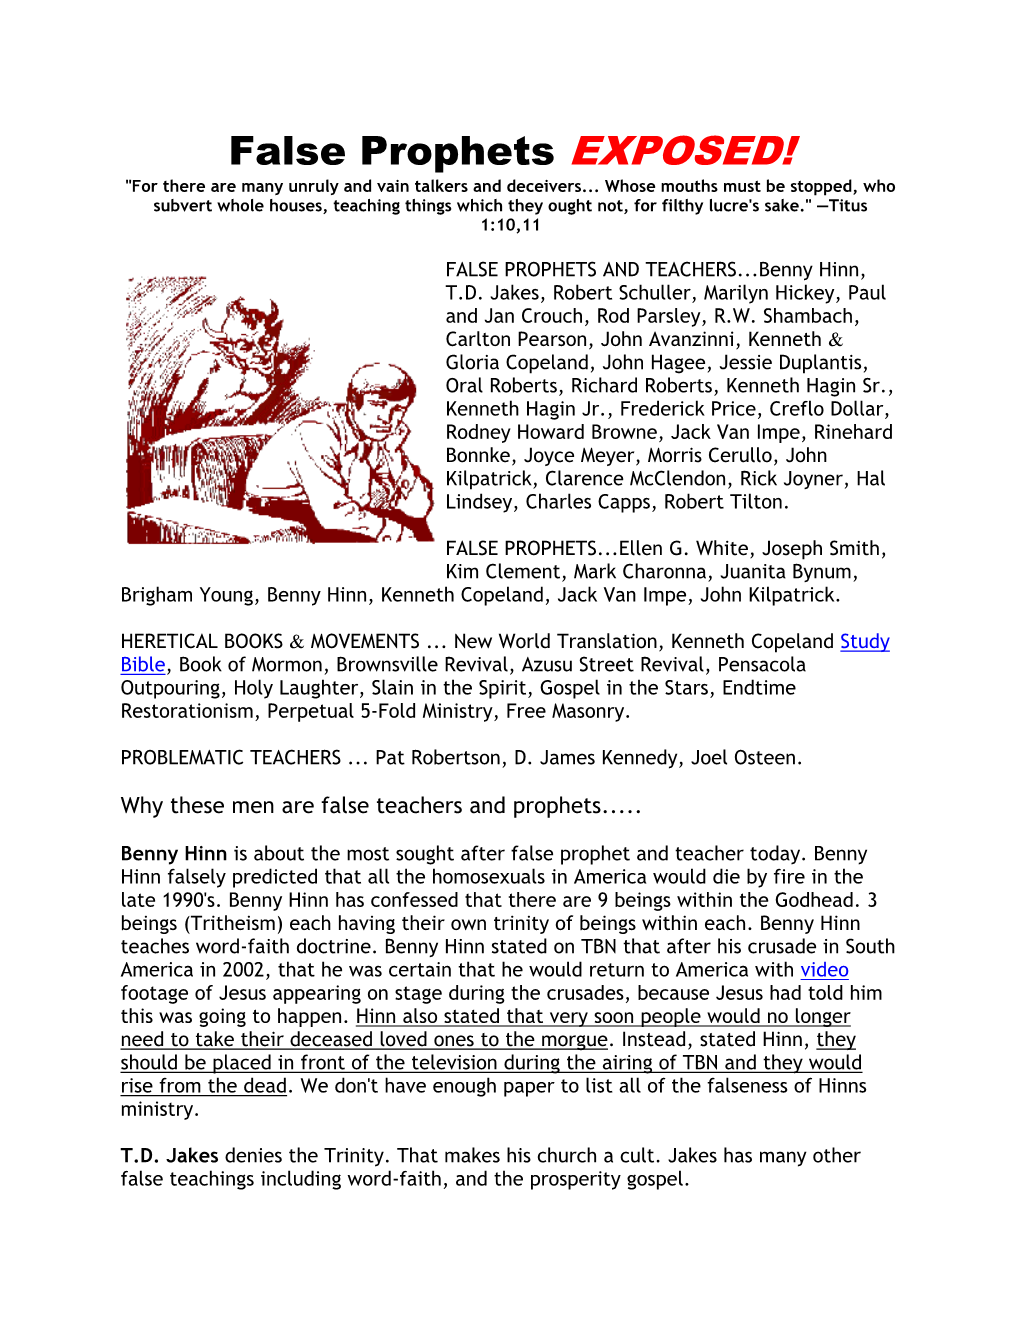 False Prophets EXPOSED! "For There Are Many Unruly and Vain Talkers and Deceivers